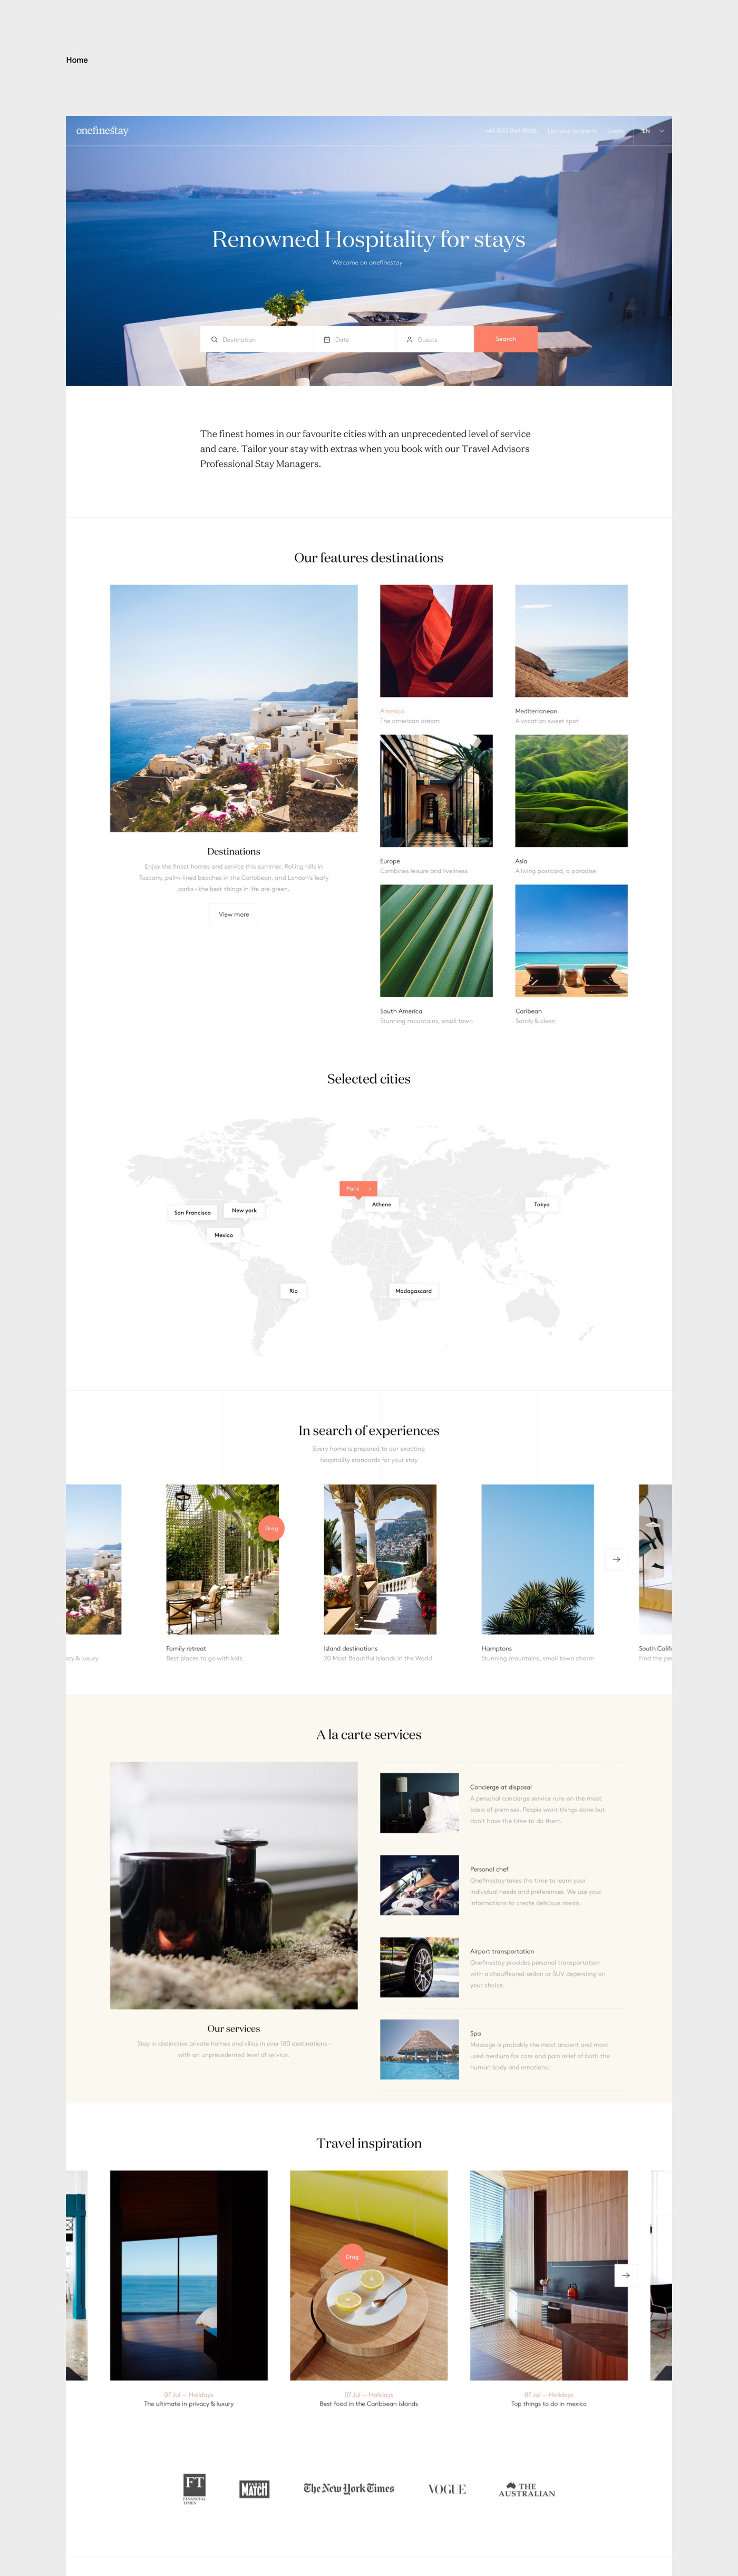 UI design airbnb property house